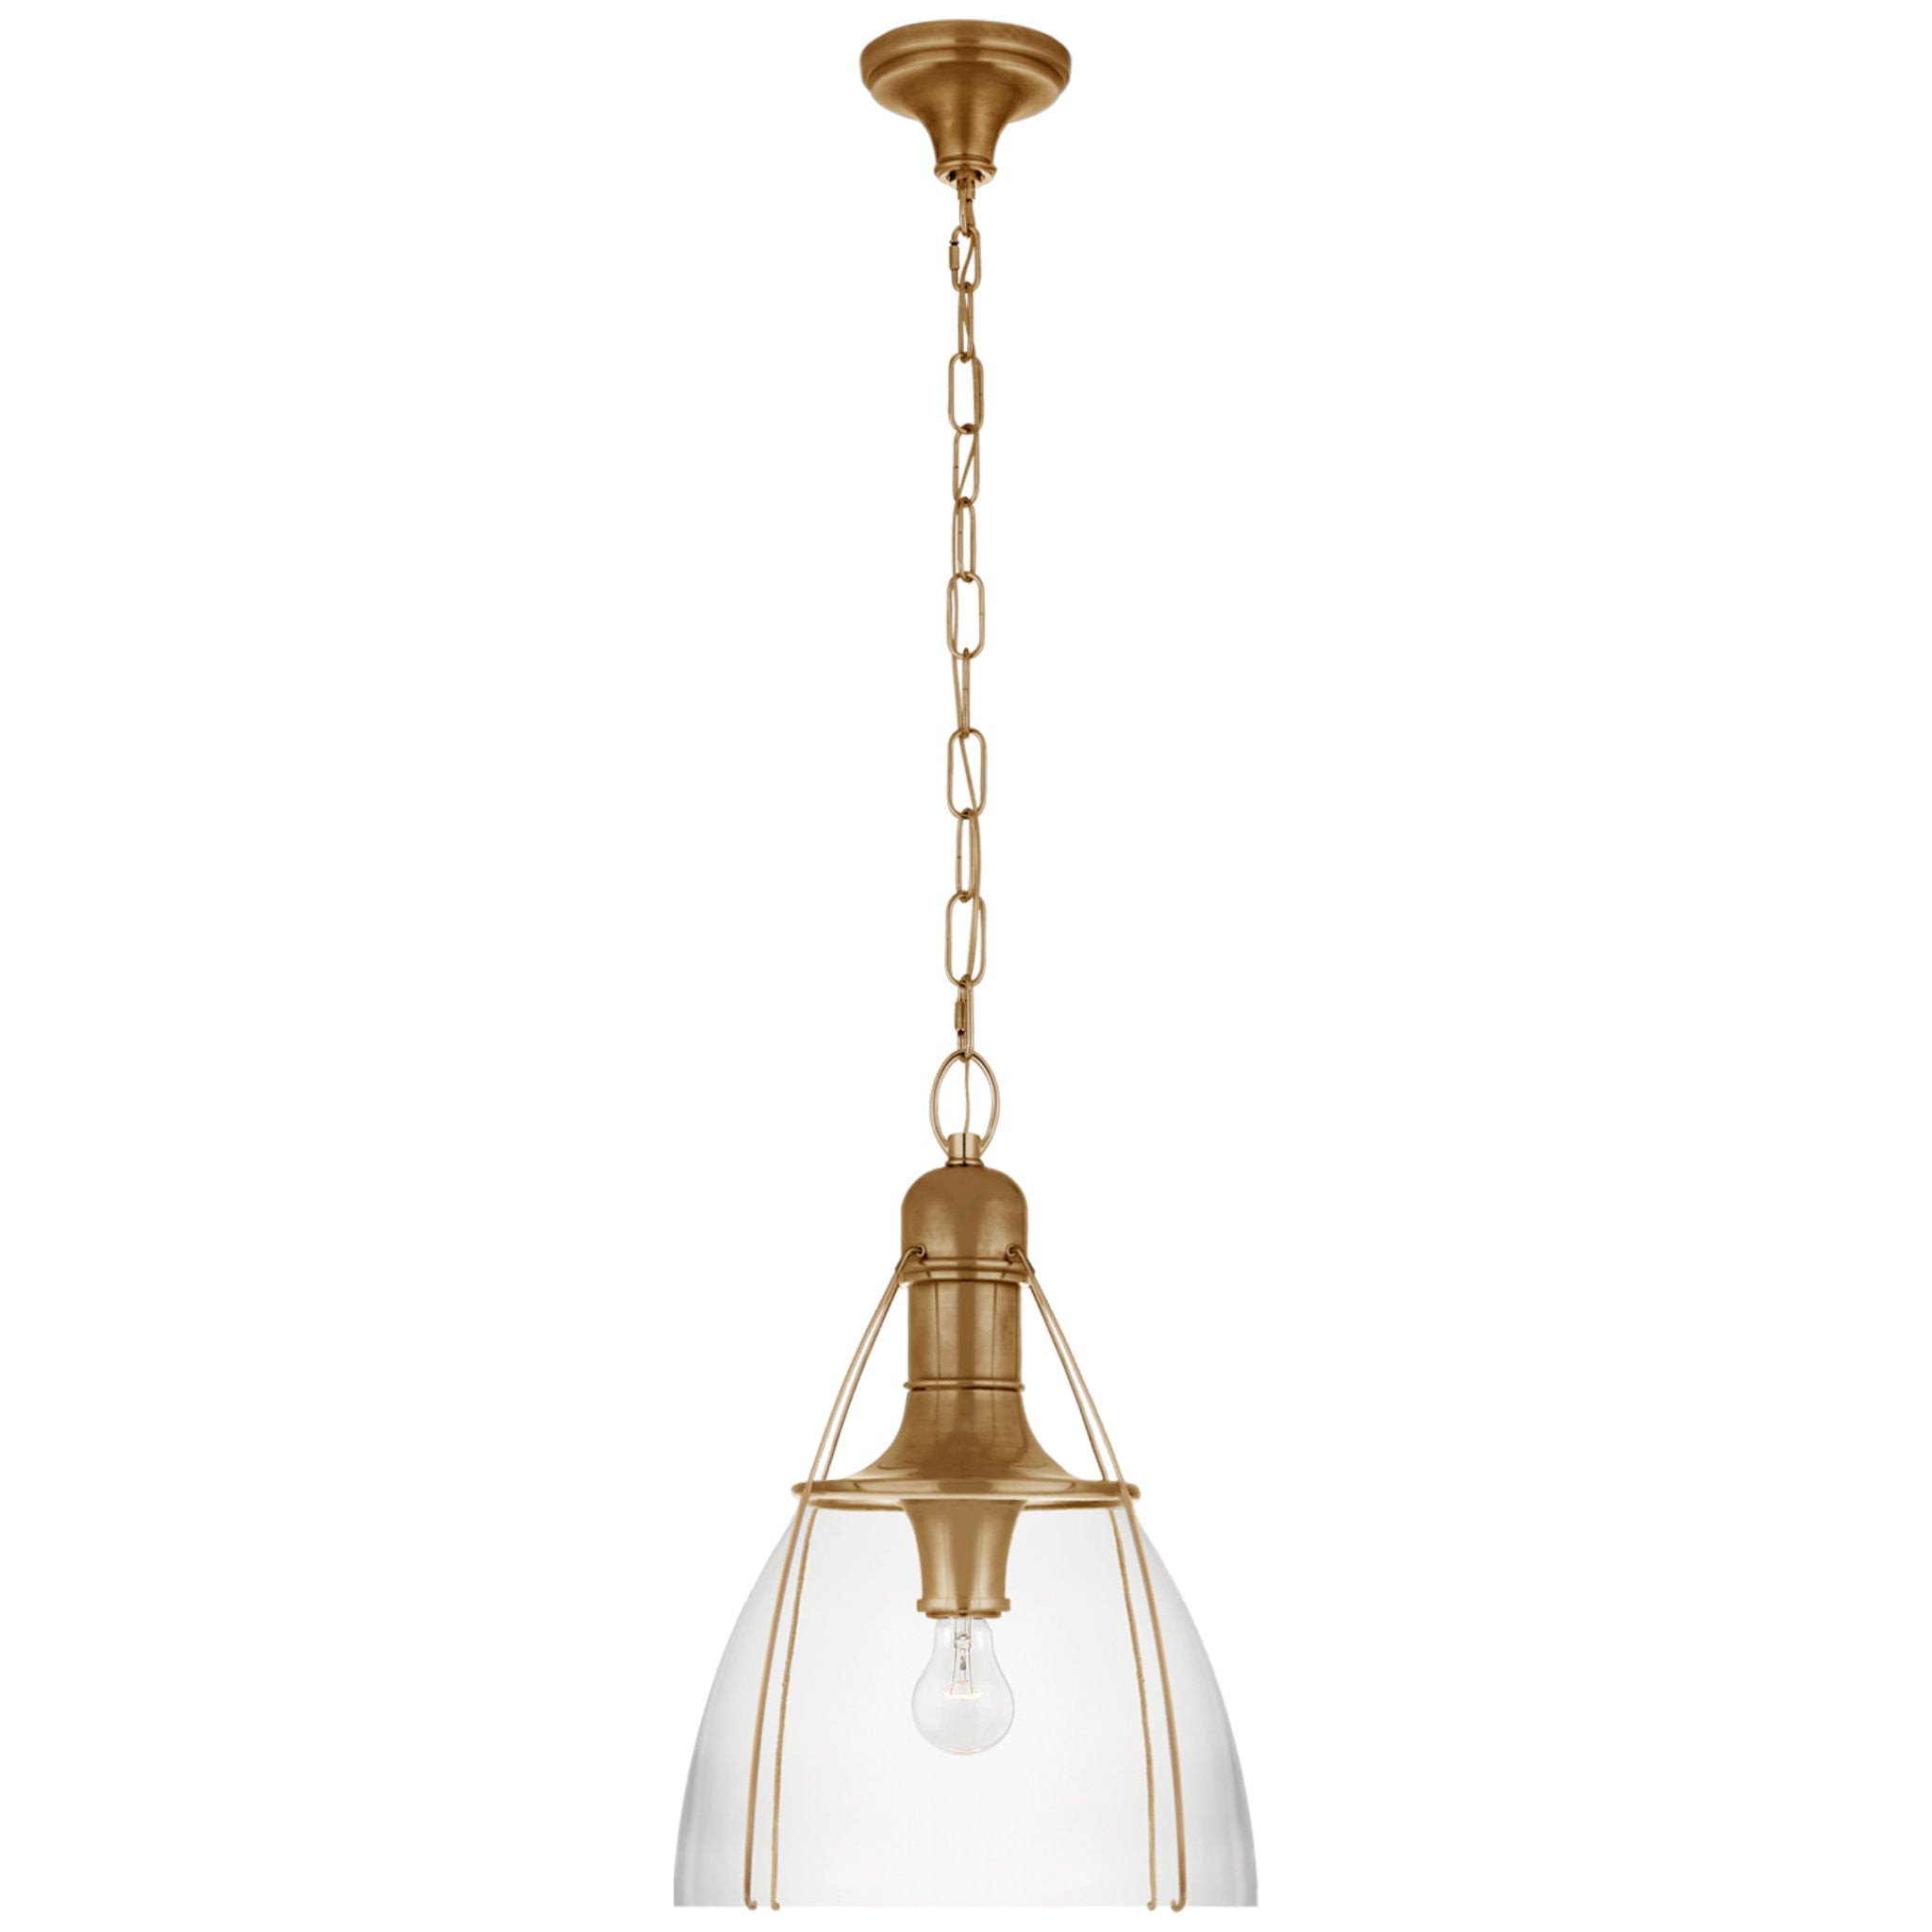 Chapman & Myers Prestwick 18" Pendant in Antique-Burnished Brass with Clear Glass